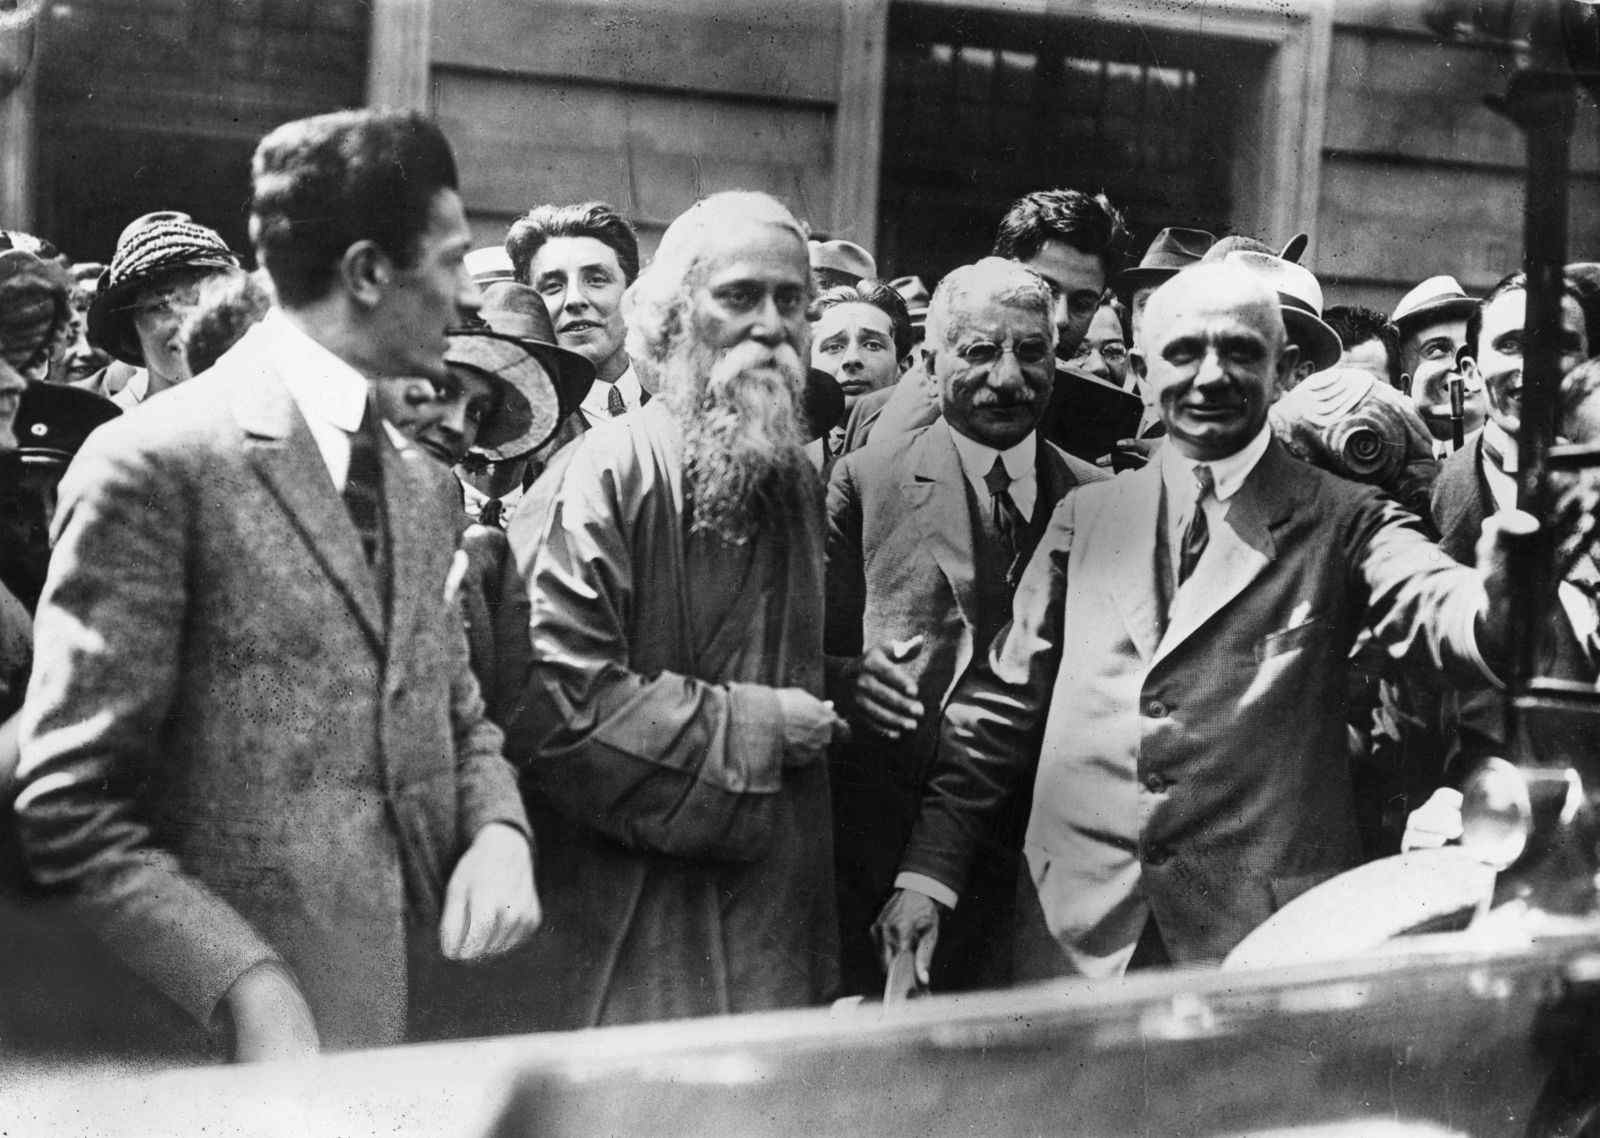 Indian poet and philosopher Rabindranath Tagore in London (Topical Press Agency/Getty Images)